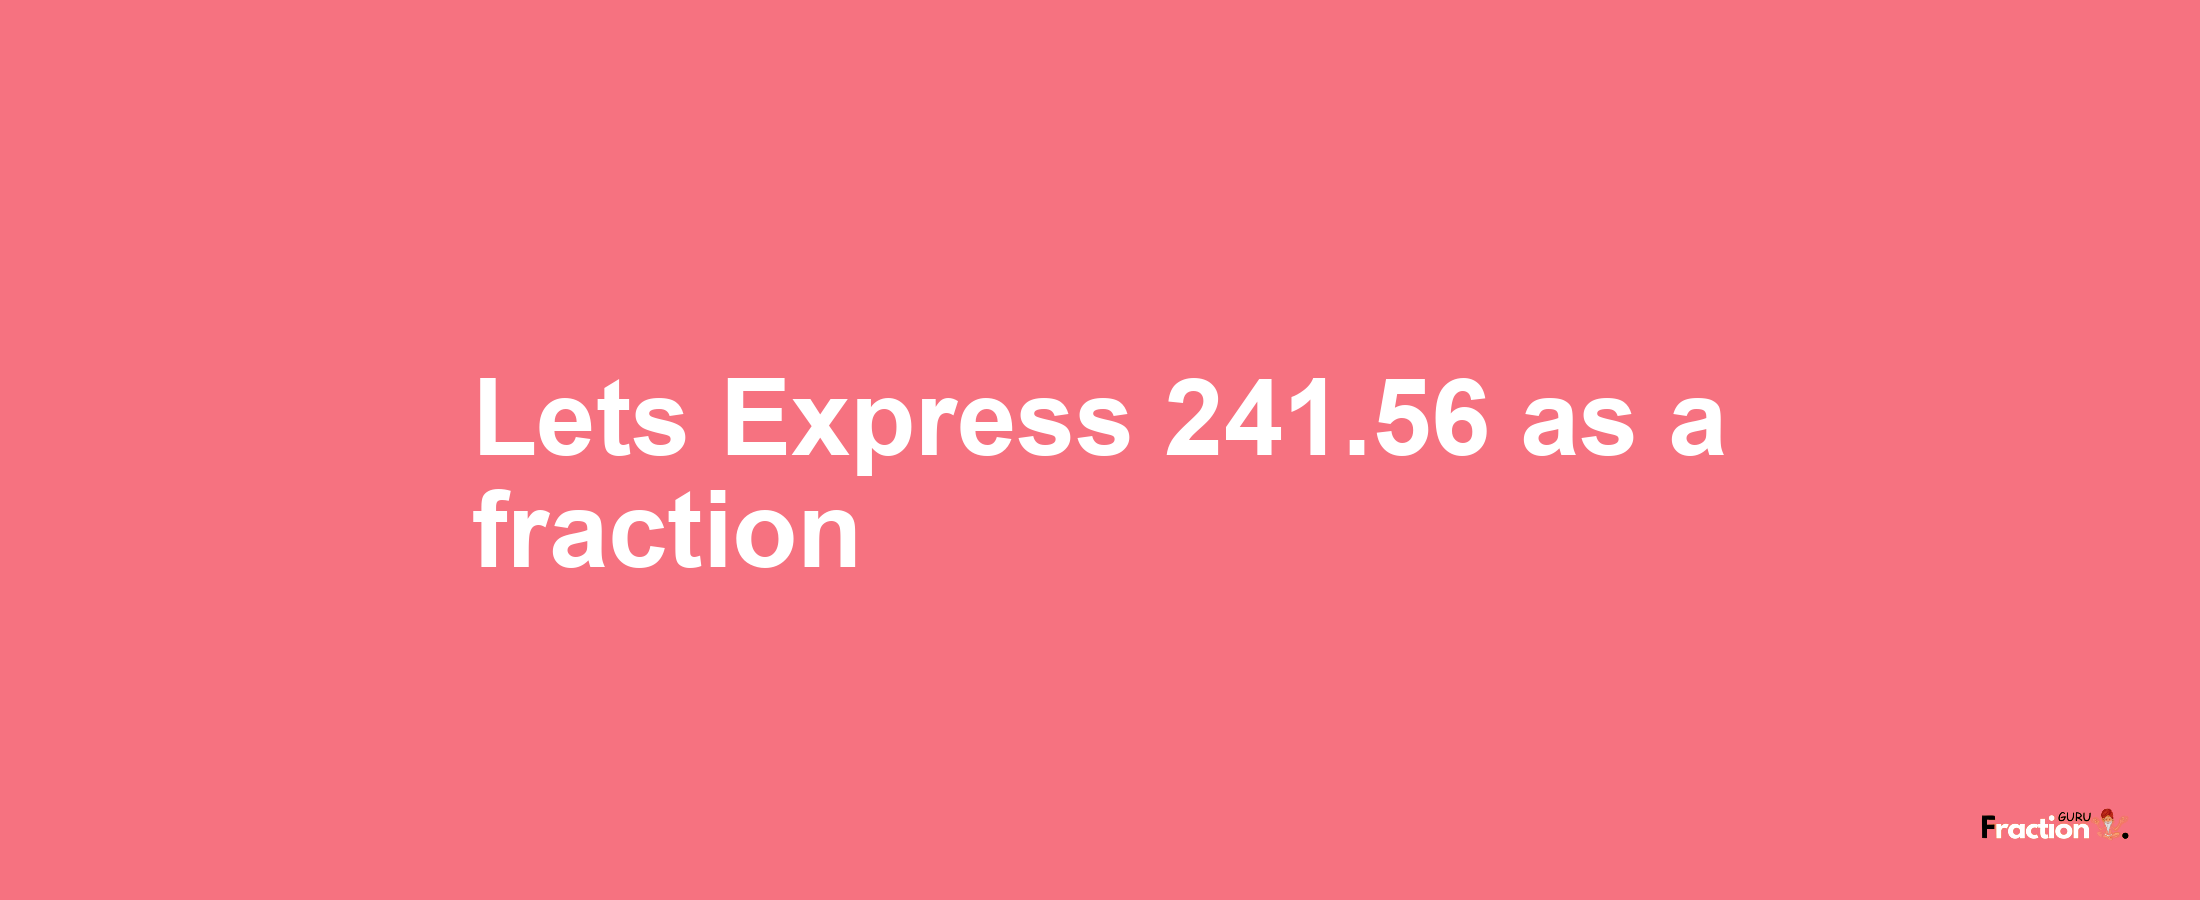 Lets Express 241.56 as afraction